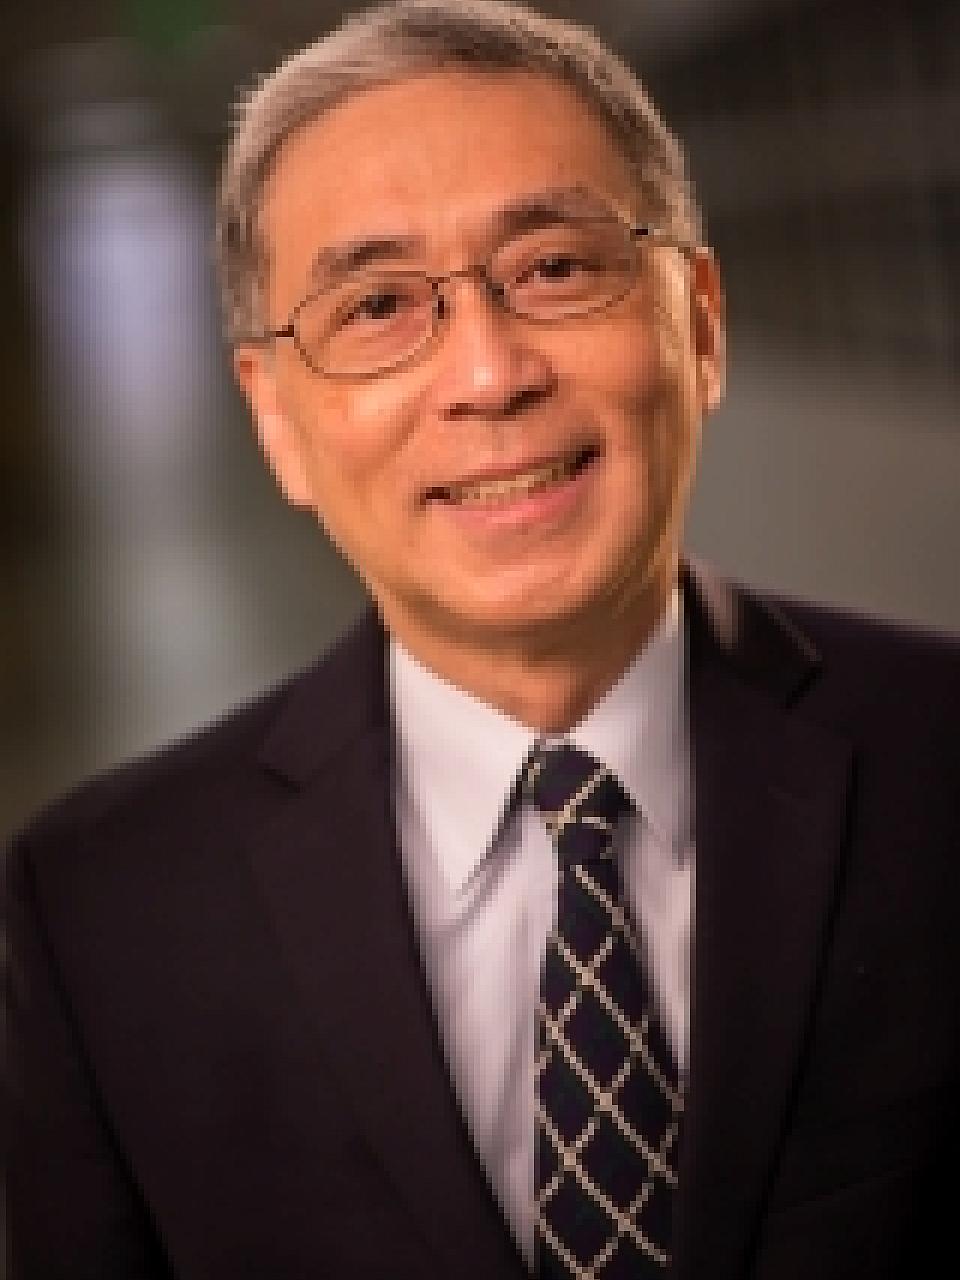 Alfred K. Cheung